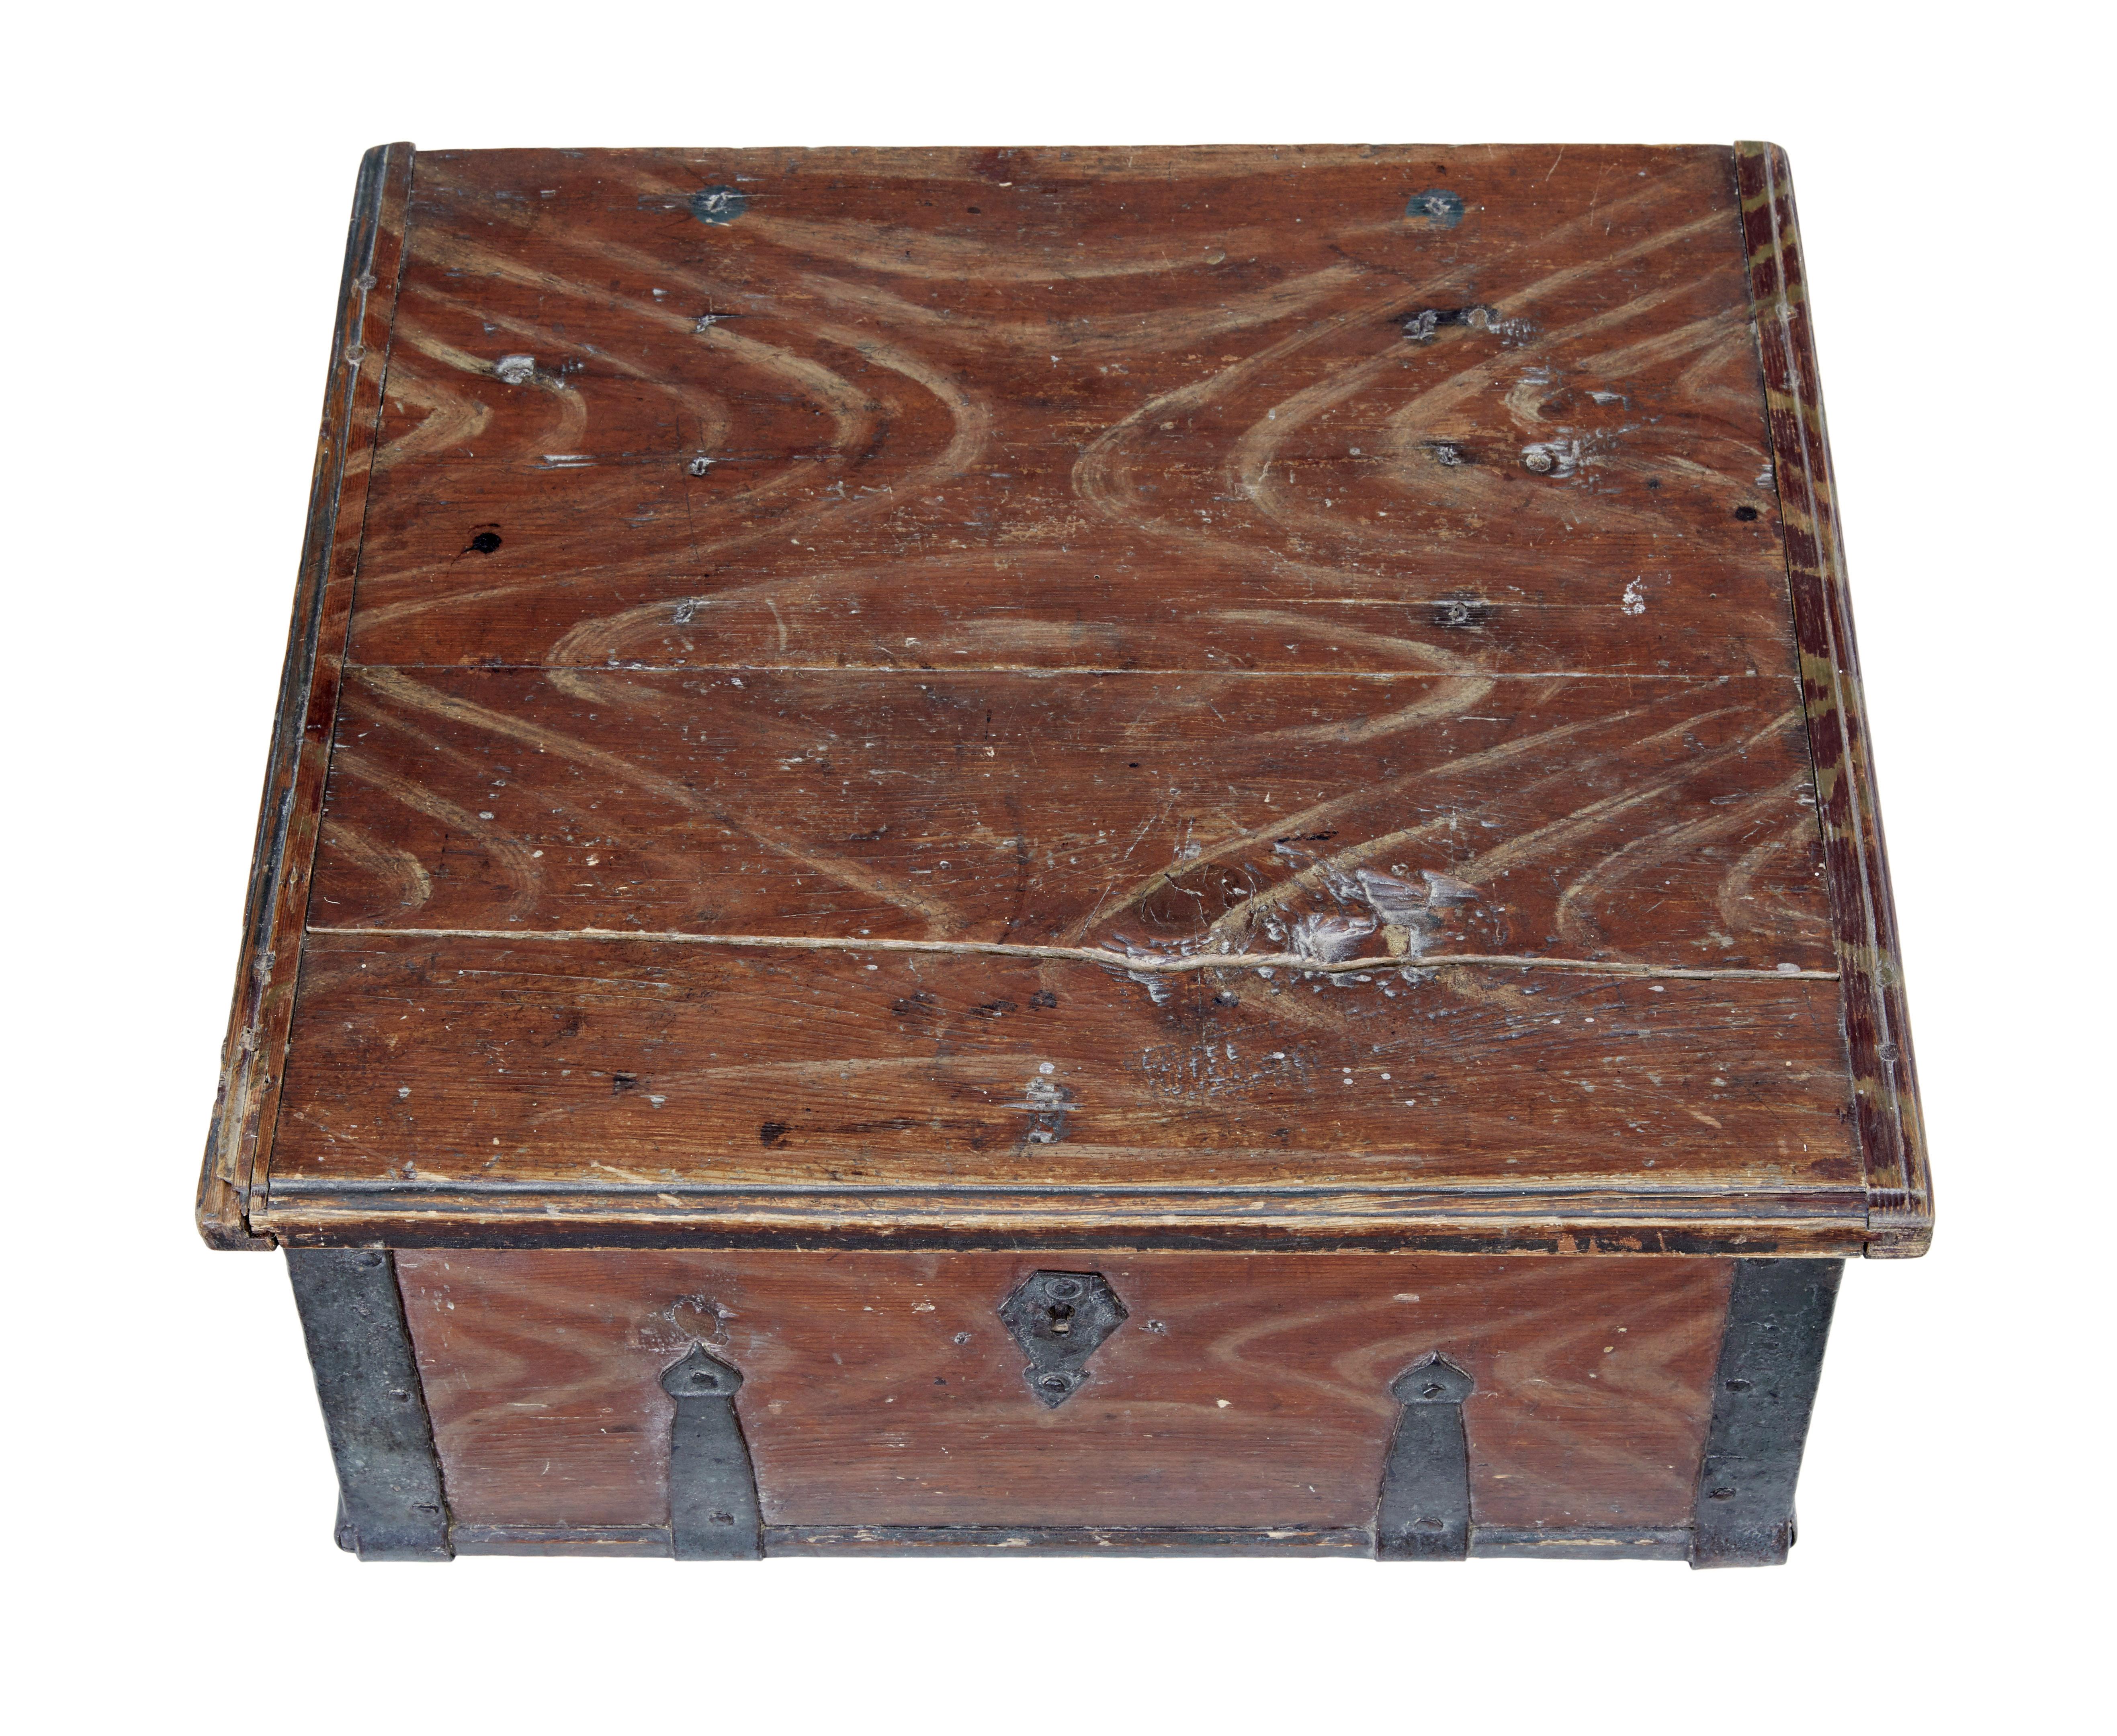 Scandinavian hand painted 19th century pine strong box circa 1840.

Good example of traditional rustic Swedish woodwork.  Painted in a russet red paint with hand painted cream drags.  Original iron strap work and hinges, also the original lock,